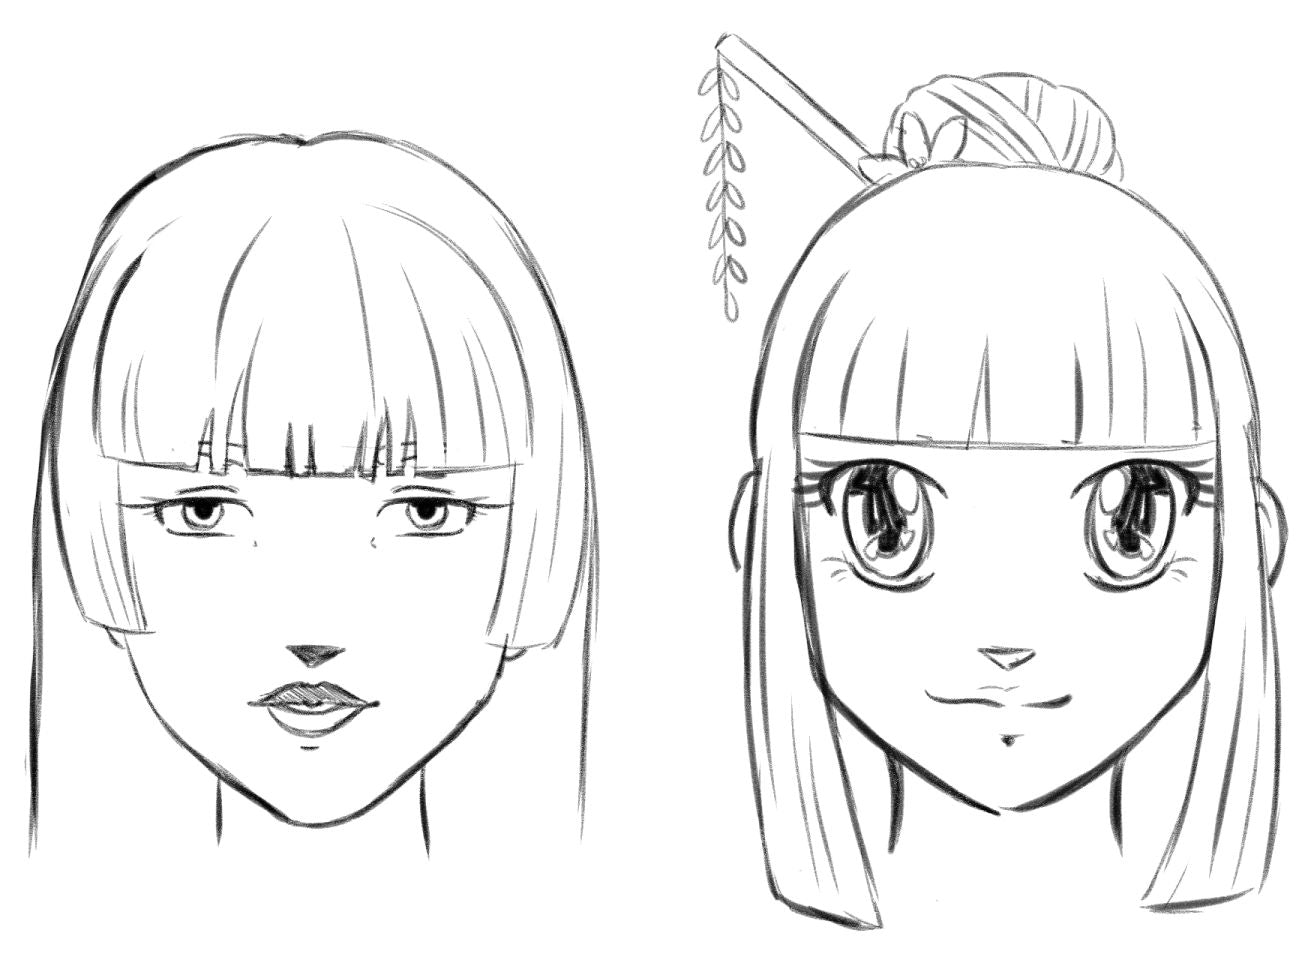 Choosing a Hairstyle for your Anime Characters